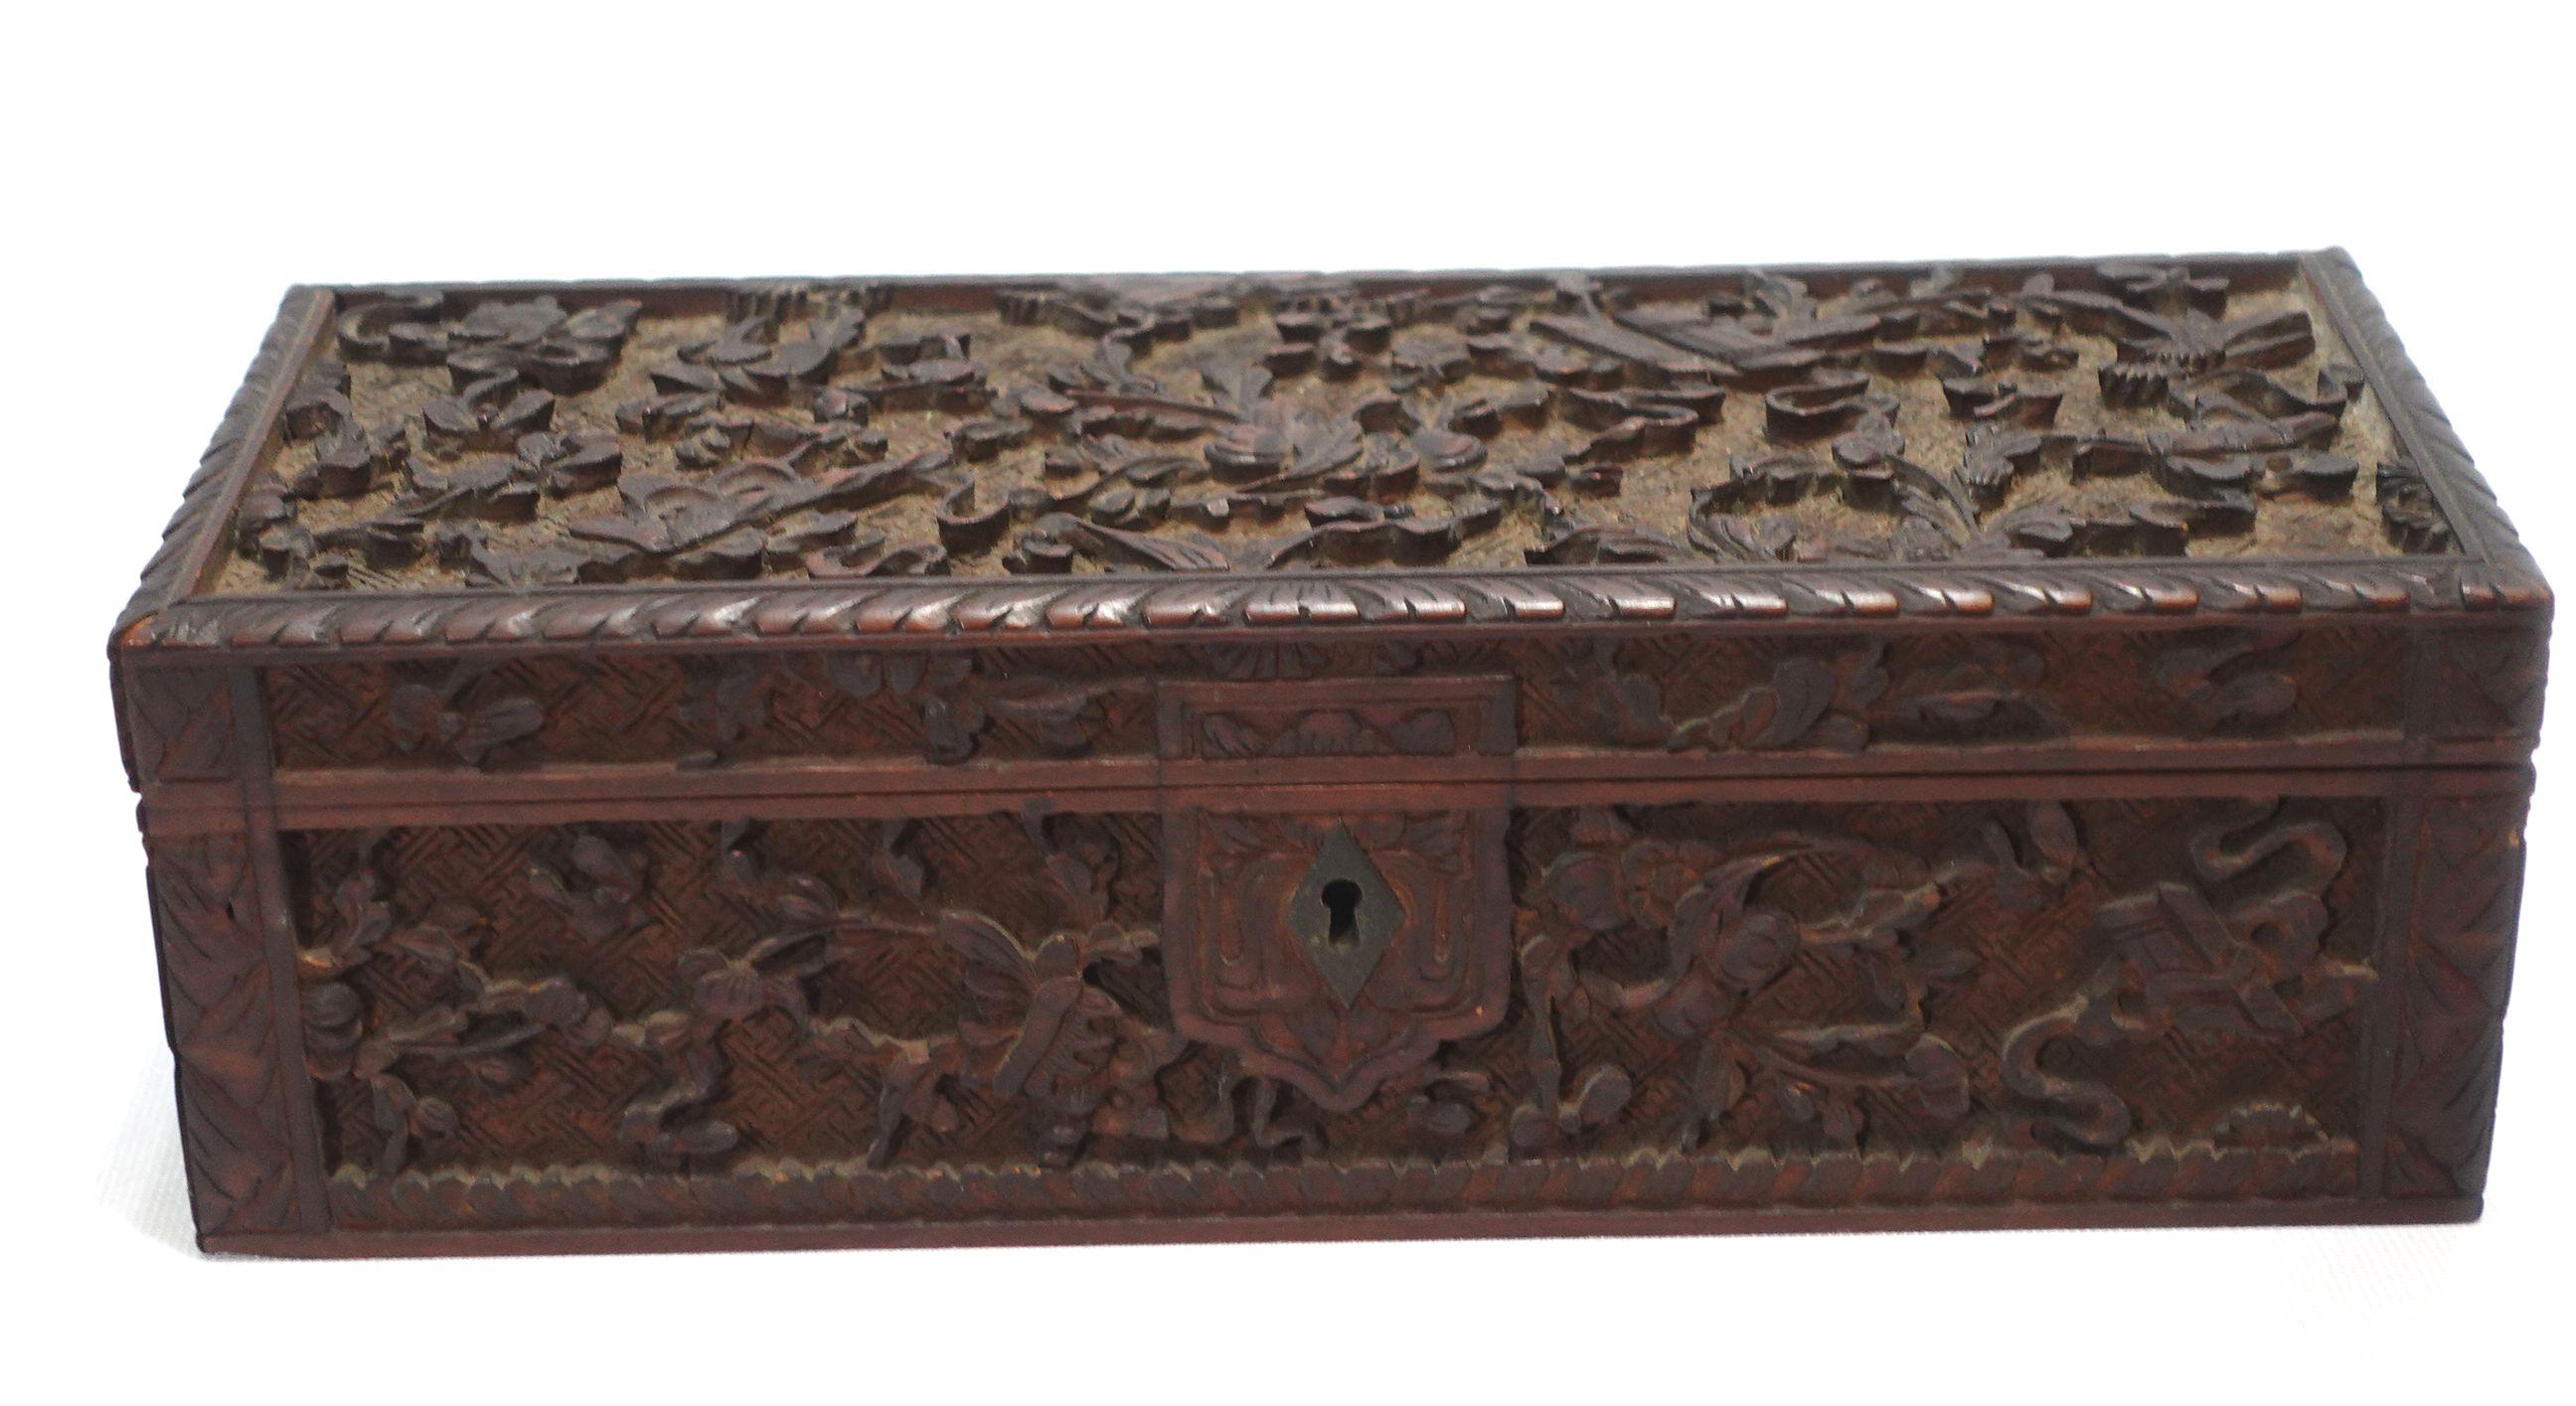 Antique Chinese Elaborately Relief Carved Glove Box W/ Original Hinges and Lock In Good Condition For Sale In Norton, MA